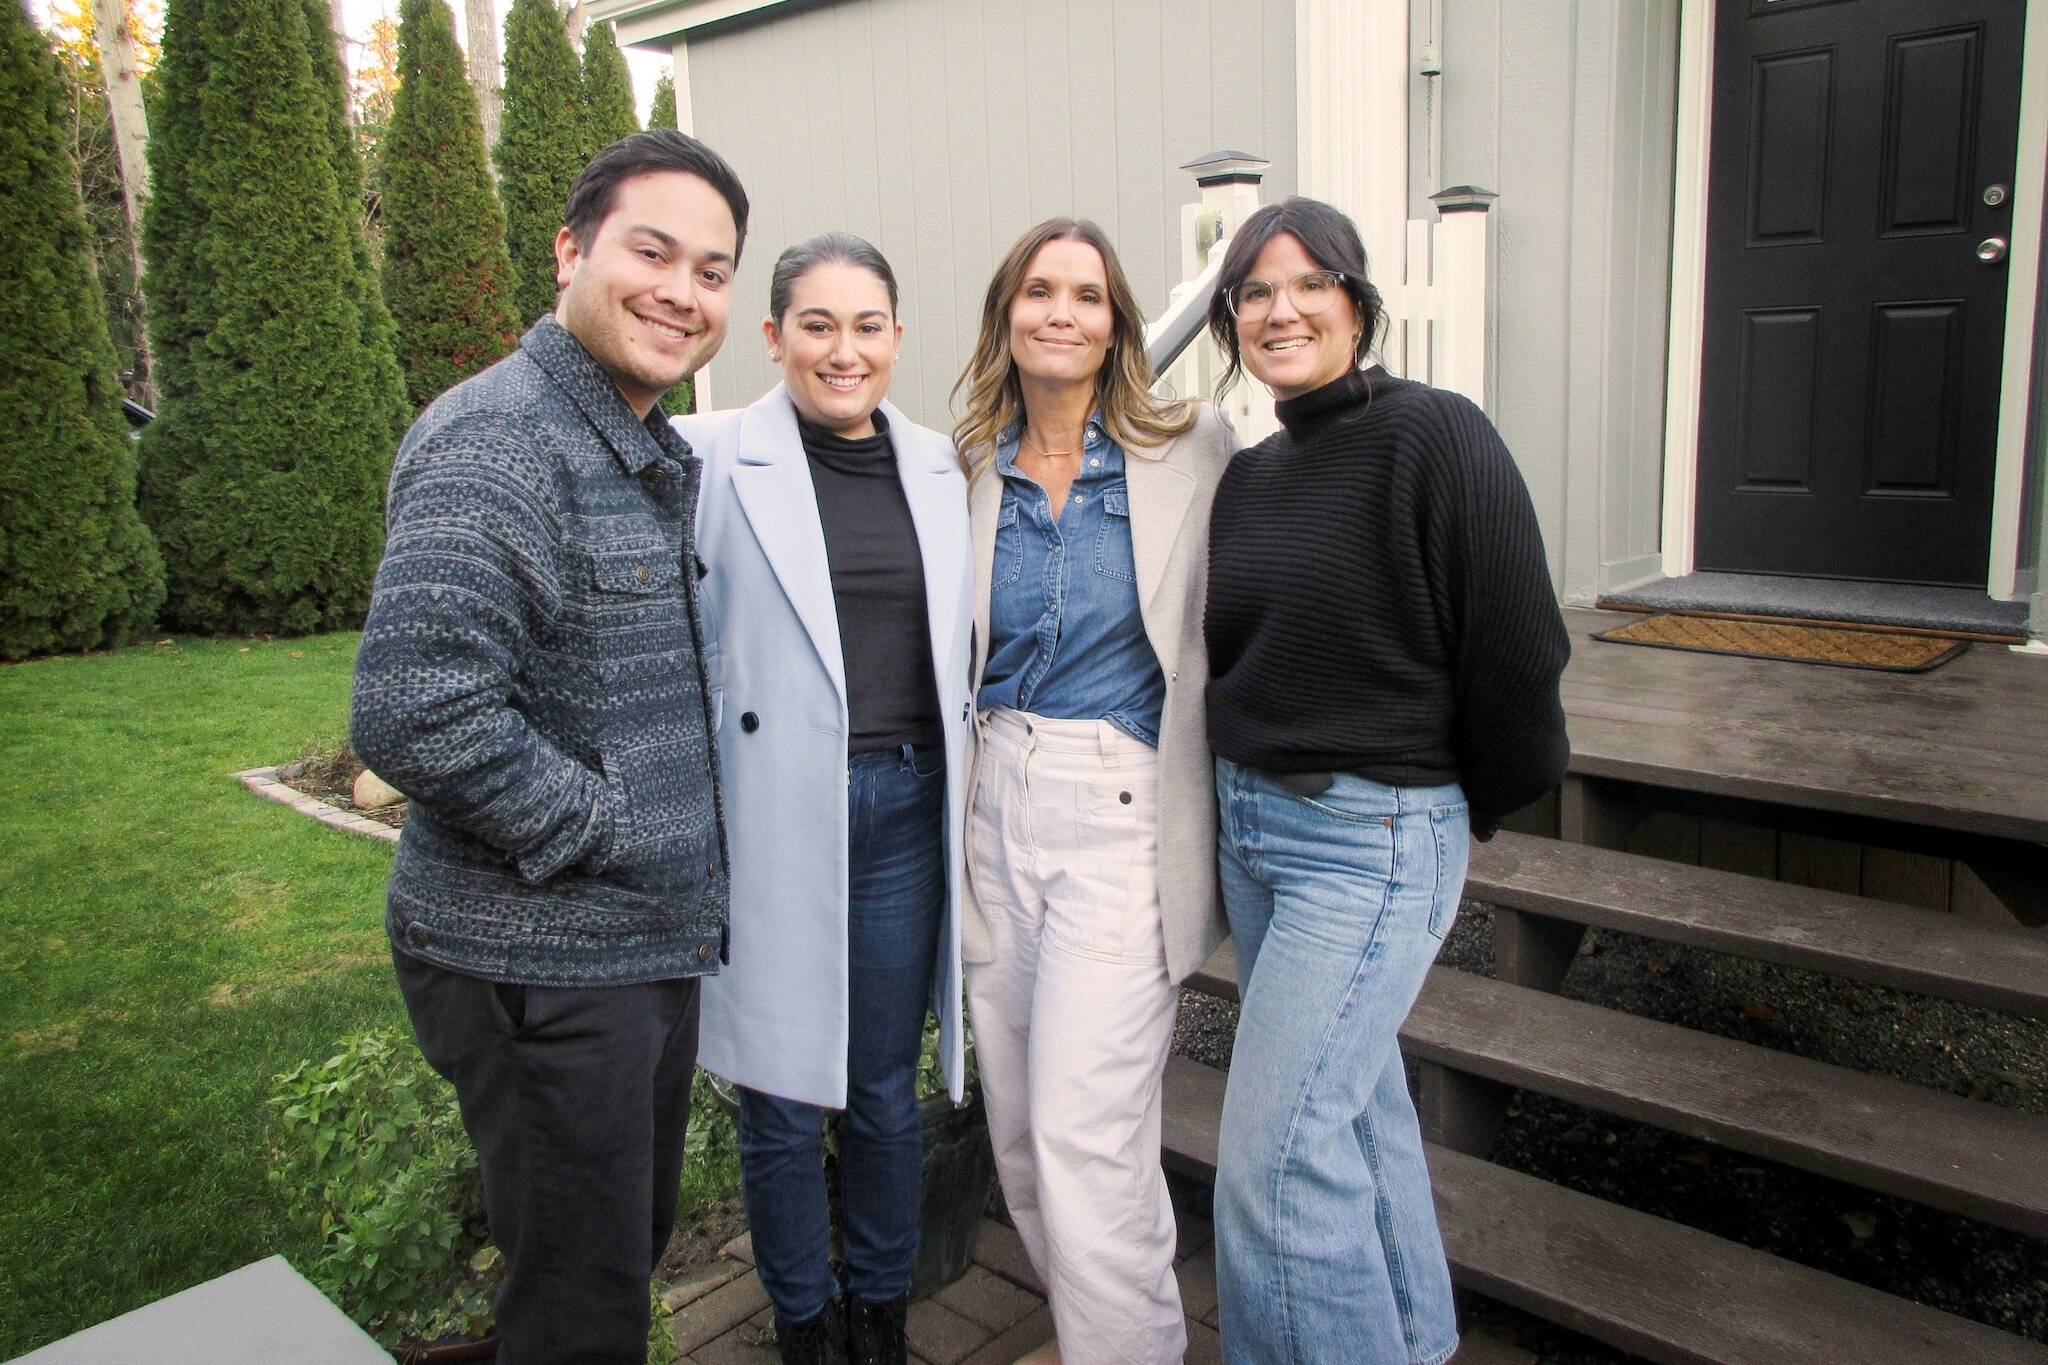 “Unsellable Houses” hosts Lyndsay Lamb (far right) and Leslie Davis (second from right) show homes in Snohomish County to Randy and Gina (at left) on an episode of “House Hunters: All Stars” that airs Thursday. (Photo provided by HGTV photo)